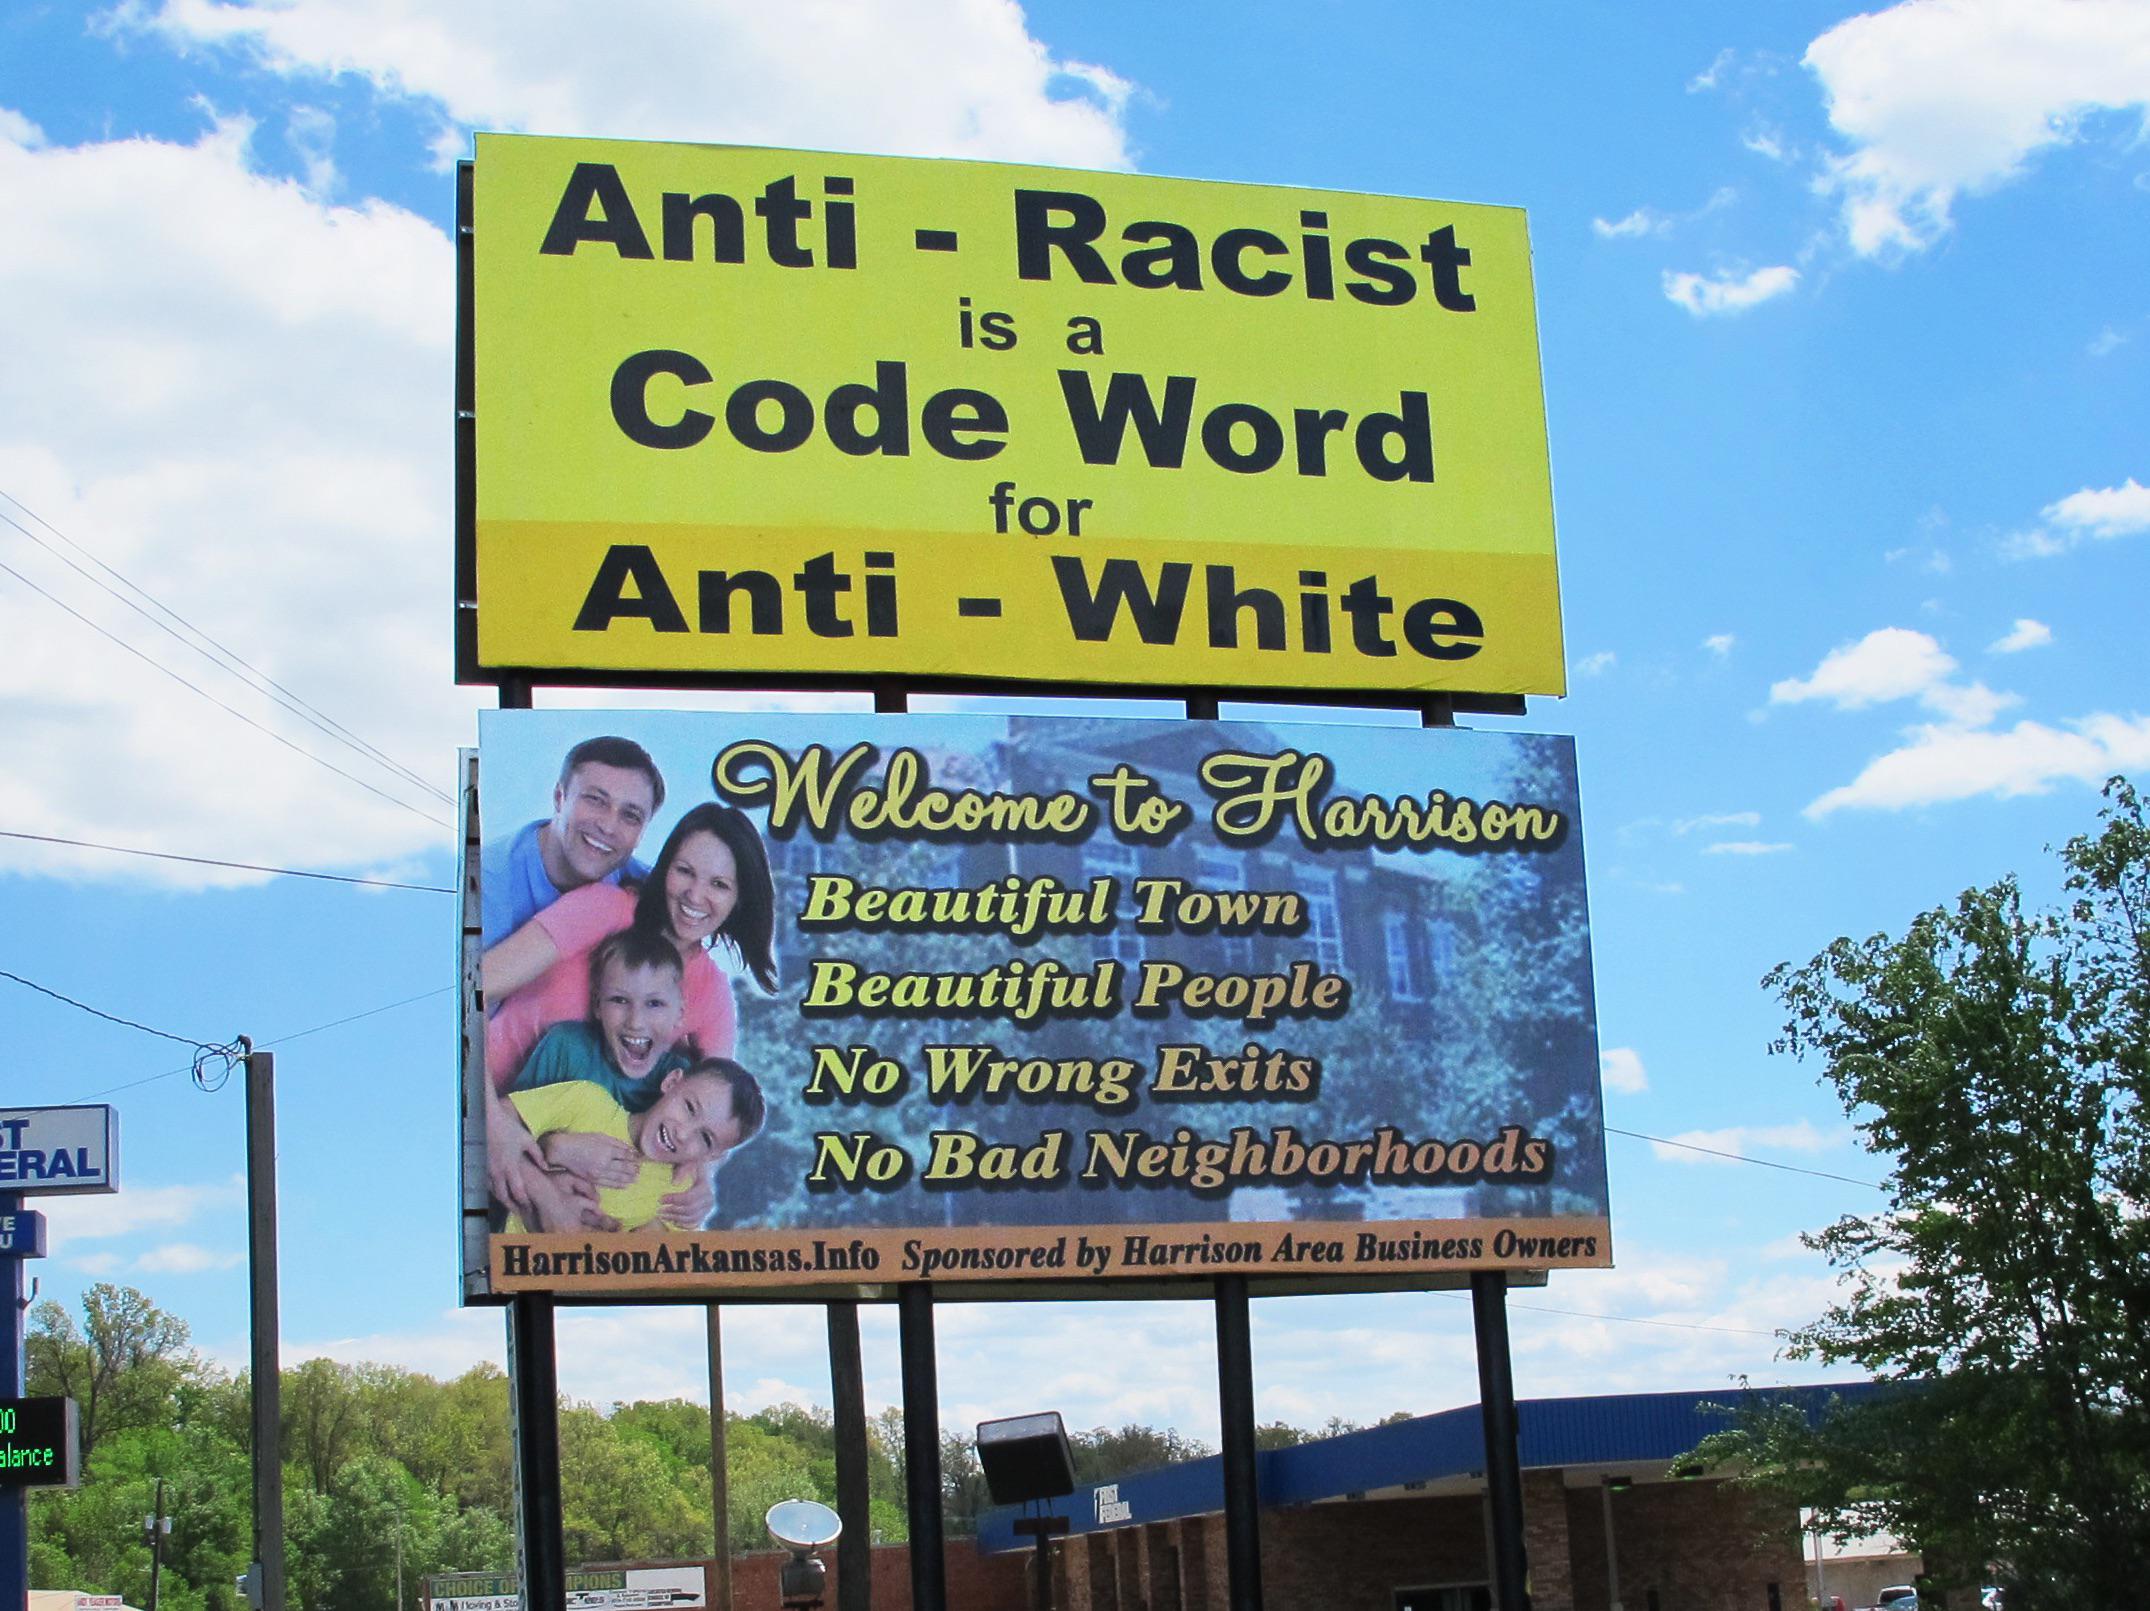 fascinating photos - Racism - Ral 10 slance AntiRacist is a Code Word for Anti White Welcome to Harrison Beautiful Town Beautiful People No Wrong Exits No Bad Neighborhoods Harrison Arkansas.Info Sponsored by Harrison Area Business Owners